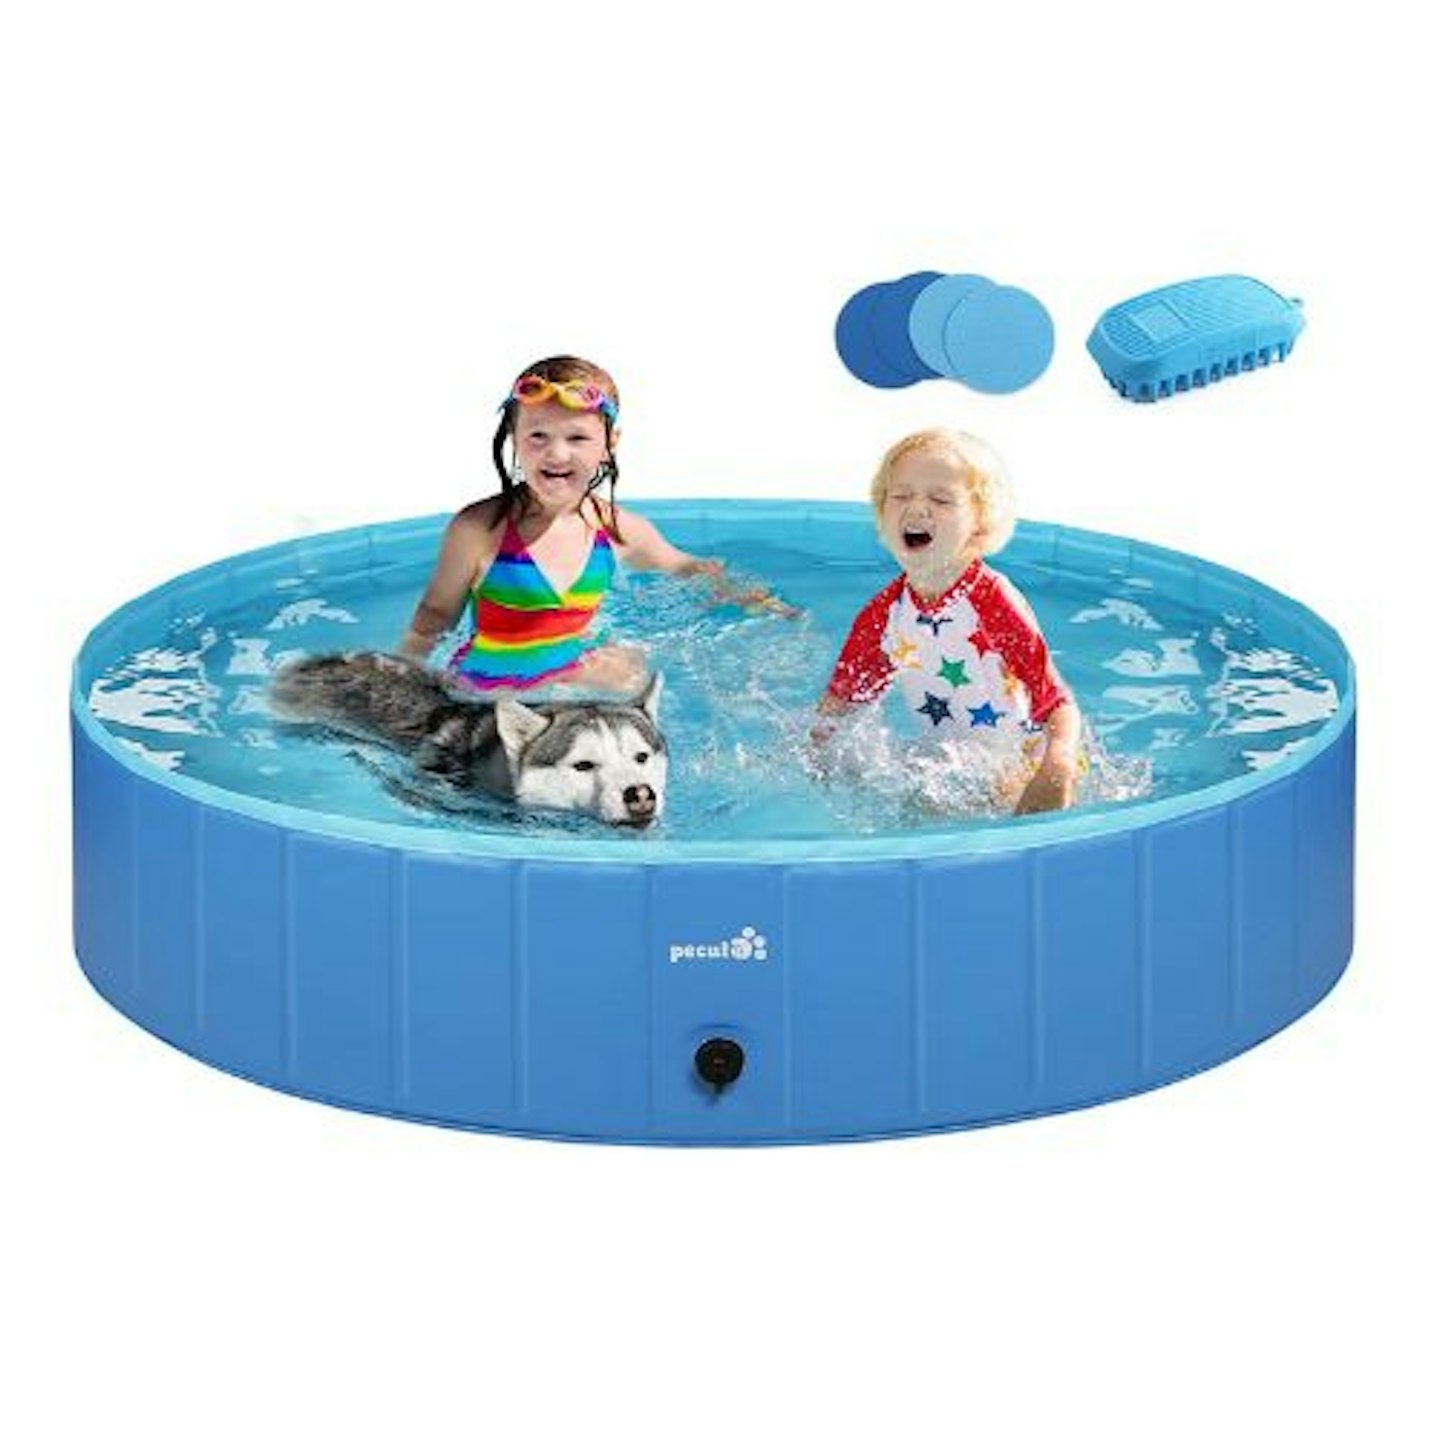 Pecute Paddling Pool for Dogs and Kids